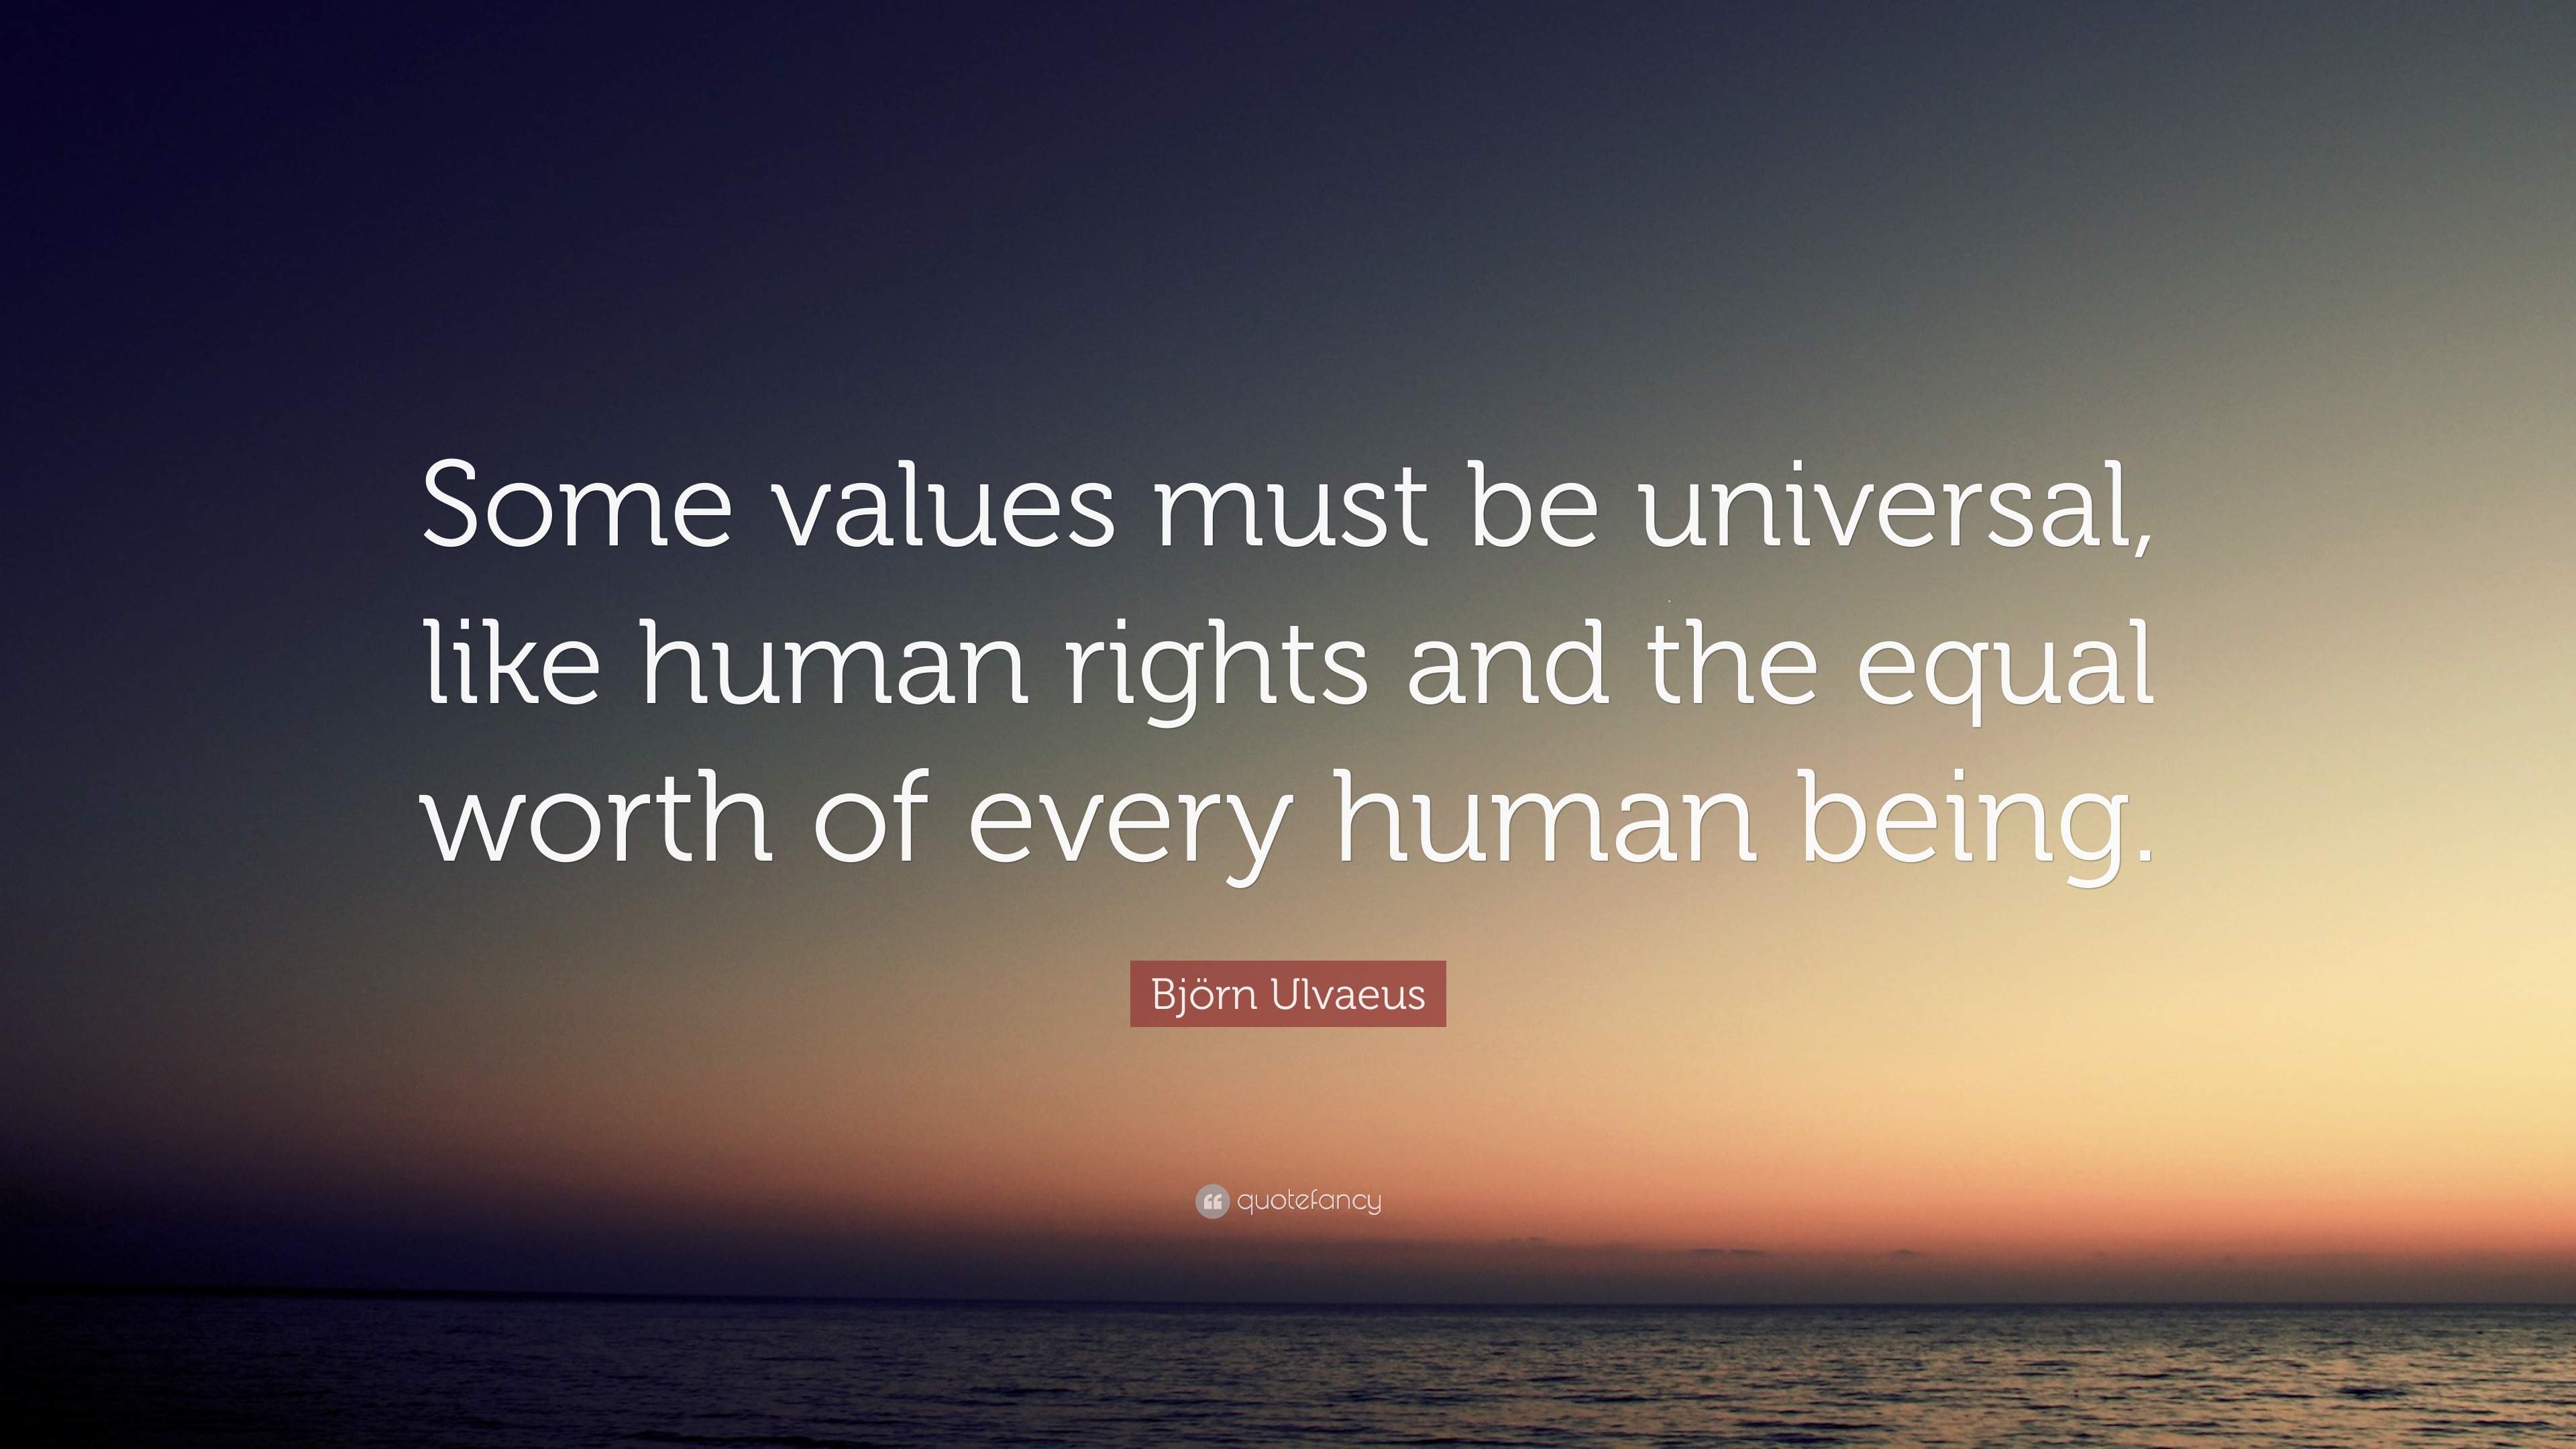 Björn Ulvaeus Quote: “Some values must be universal, like human rights